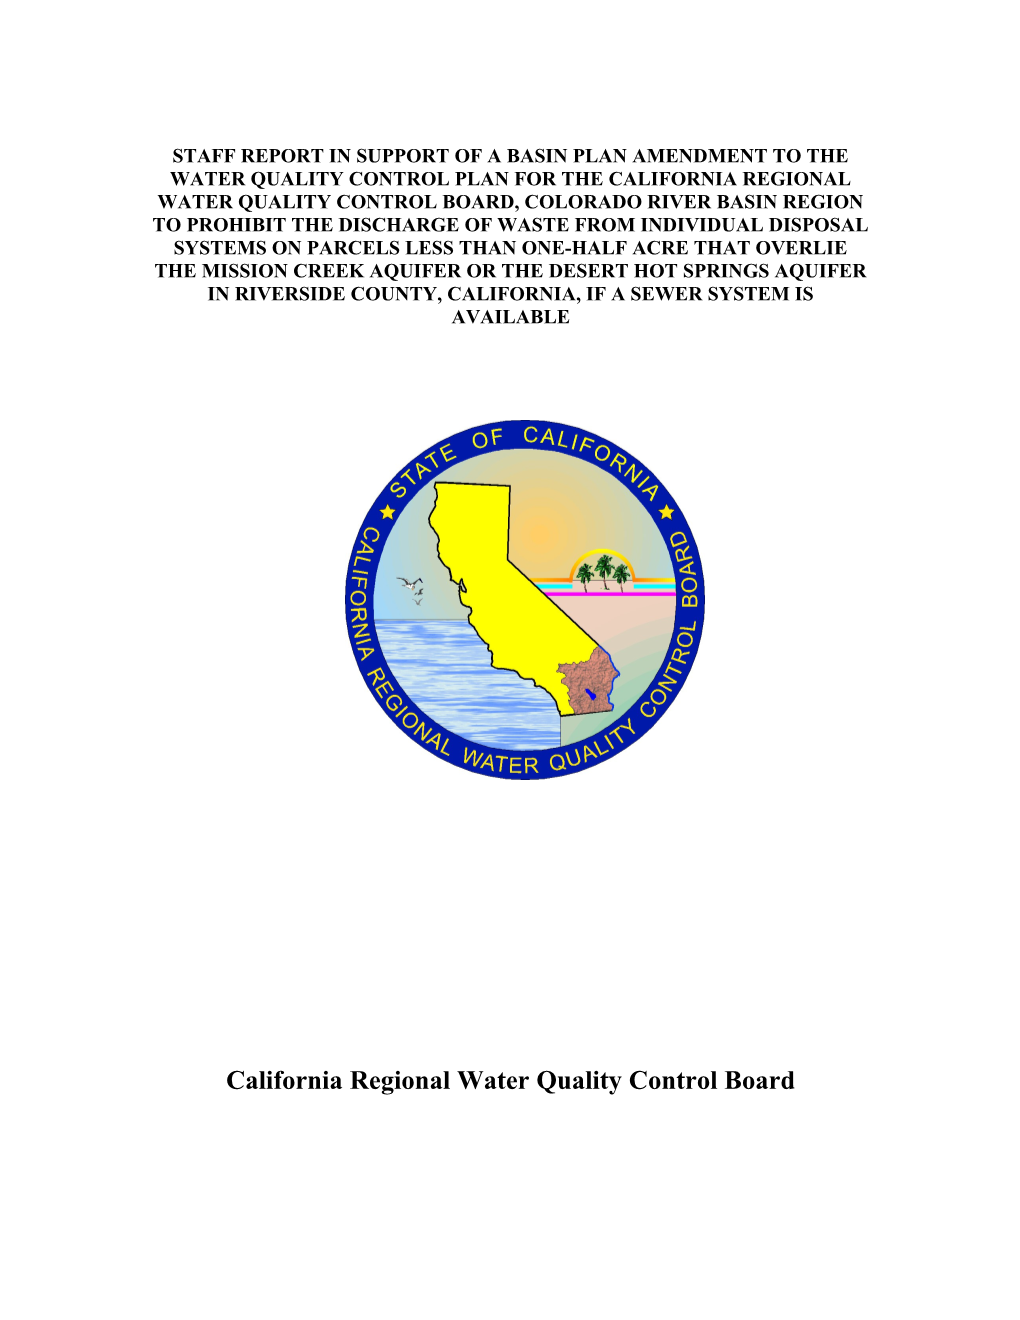 Staff Report in Support of a Basin Plan Amendment to the Water Quality Control Plan For